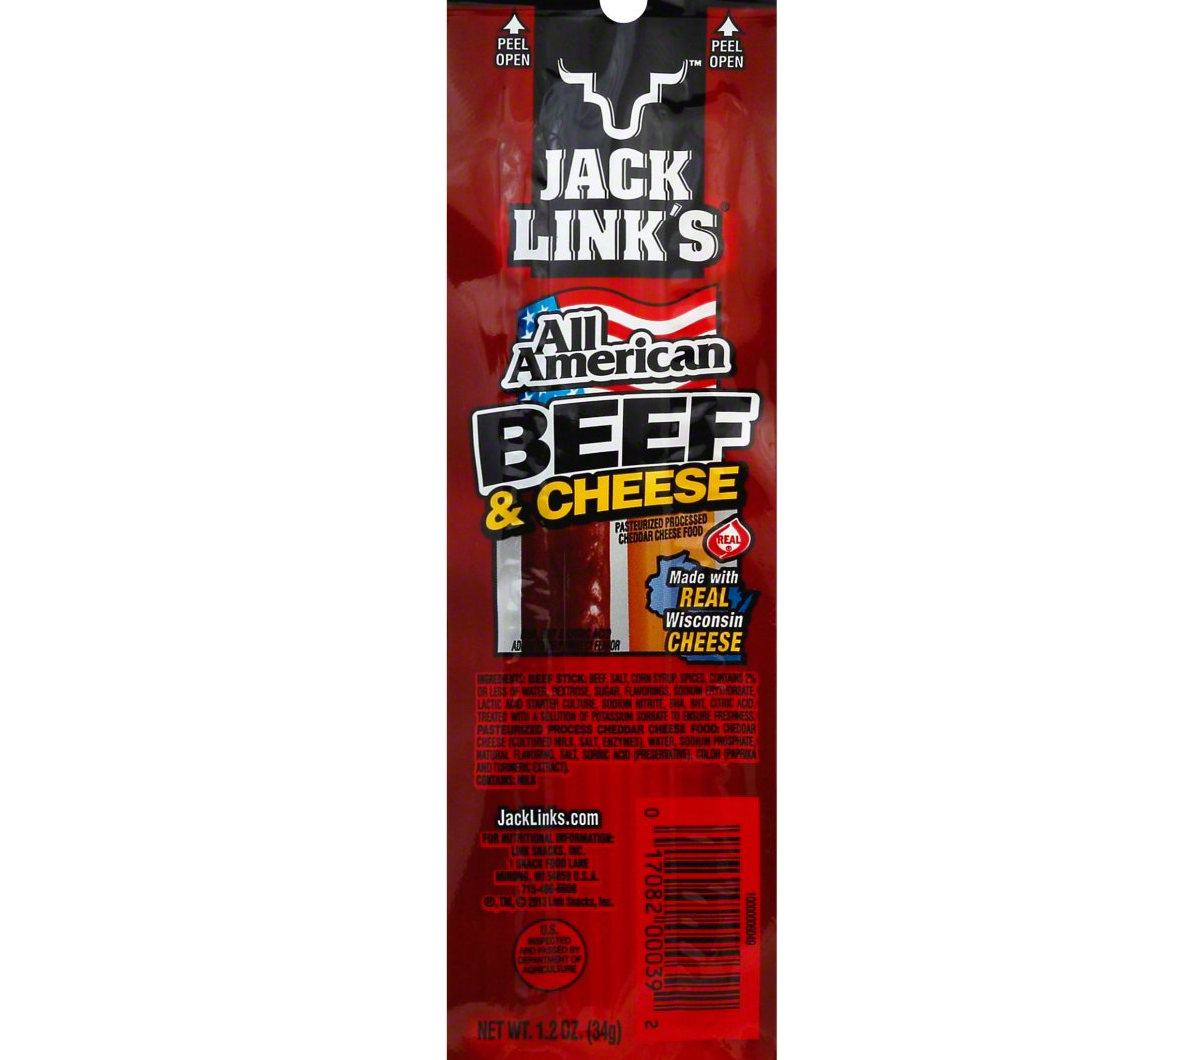 Jack Link's Bar Variety Pack Review